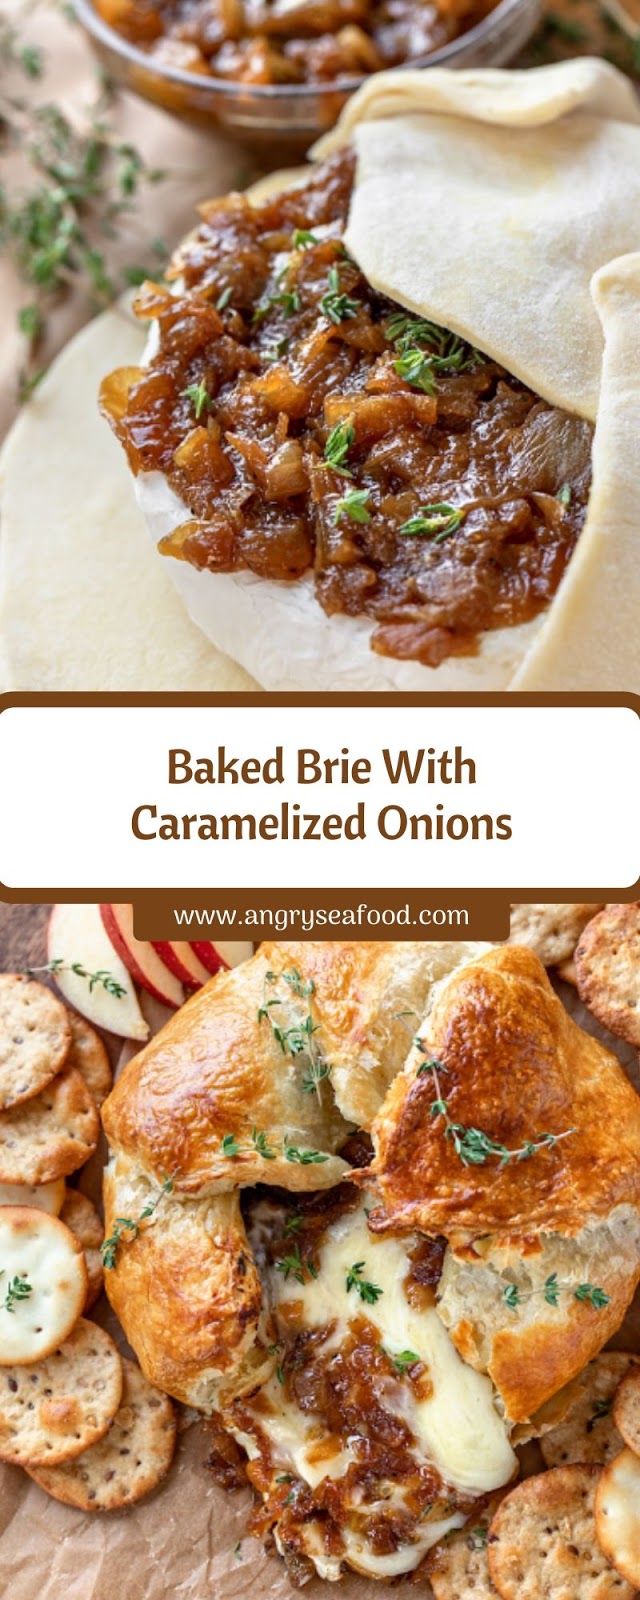 Baked Brie With Caramelized Onions